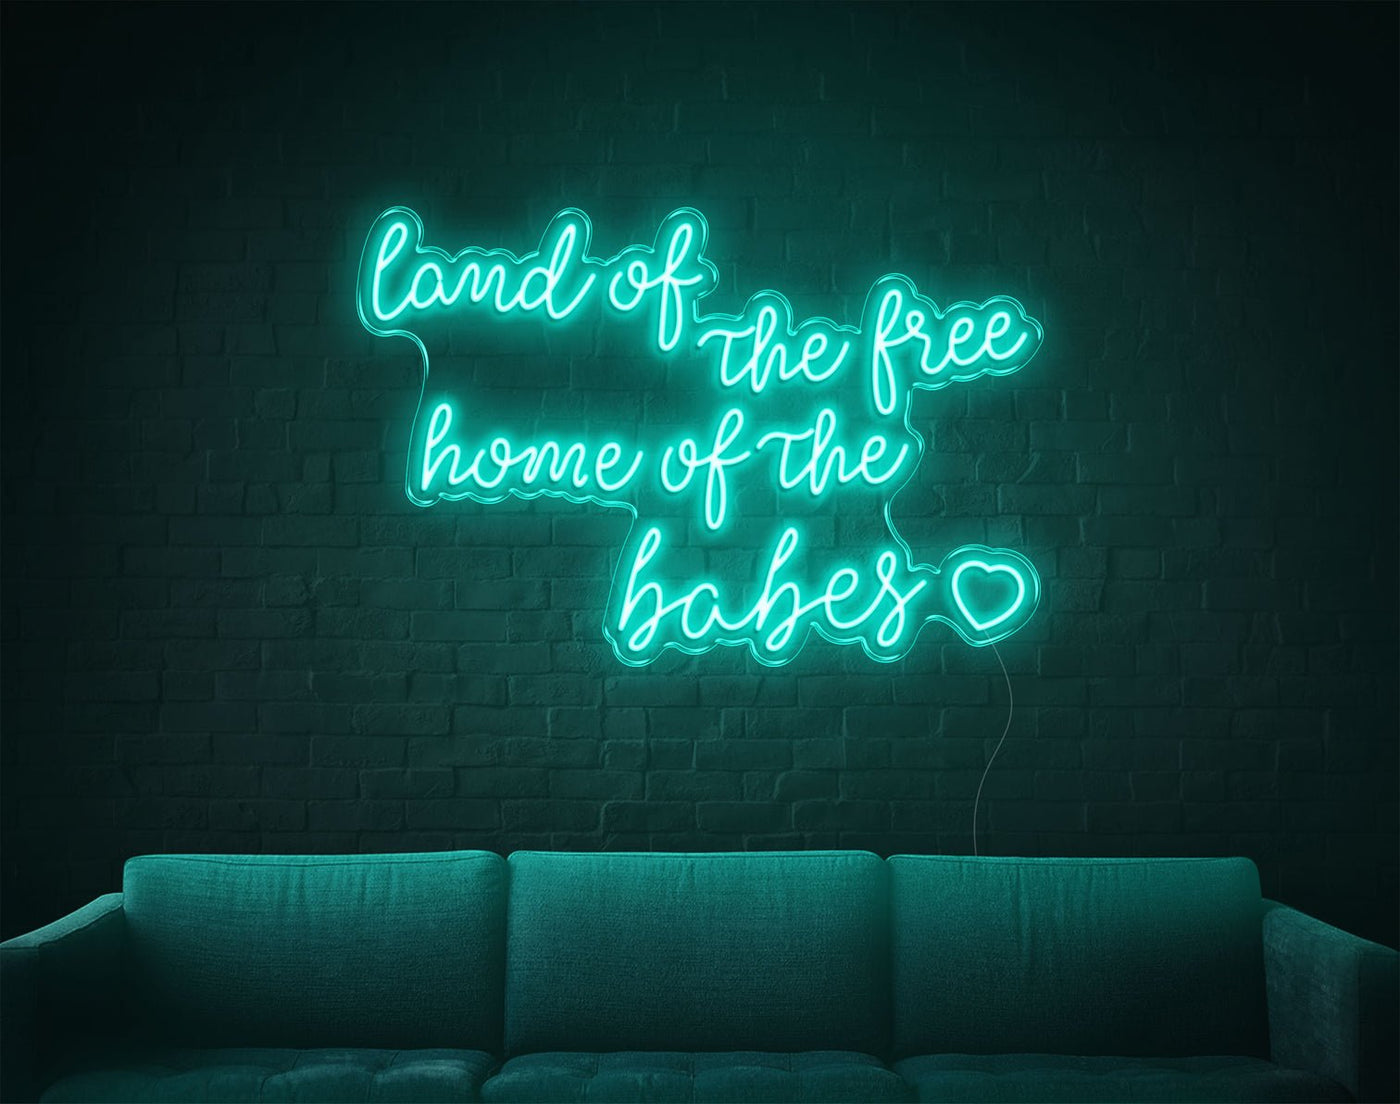 Land Of The Free LED Neon Sign - 24inch x 36inchTurquoise